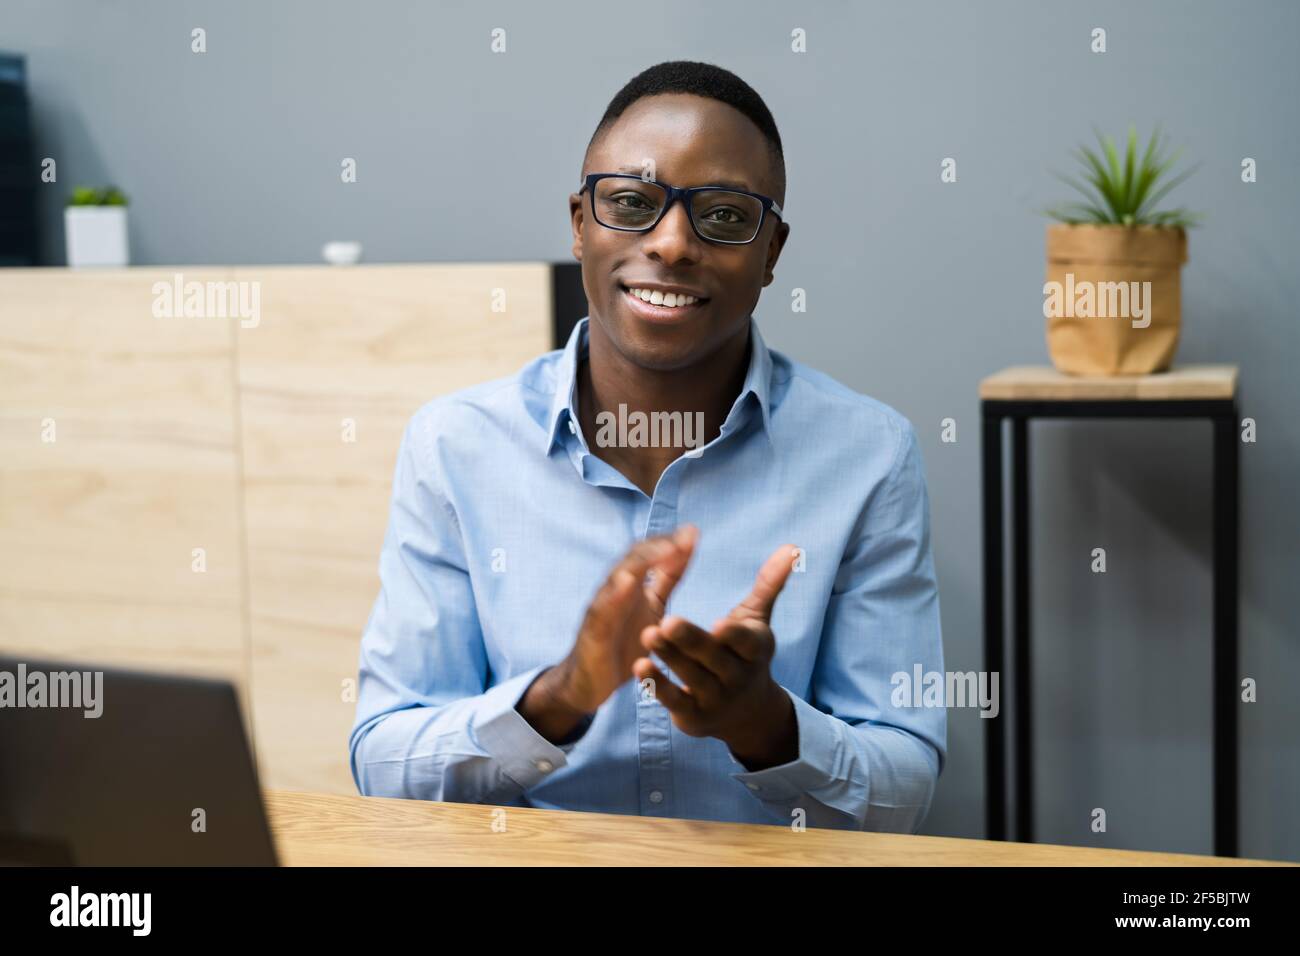 African American Black Man Applause And Clap In Virtual Remote Meeting Stock Photo